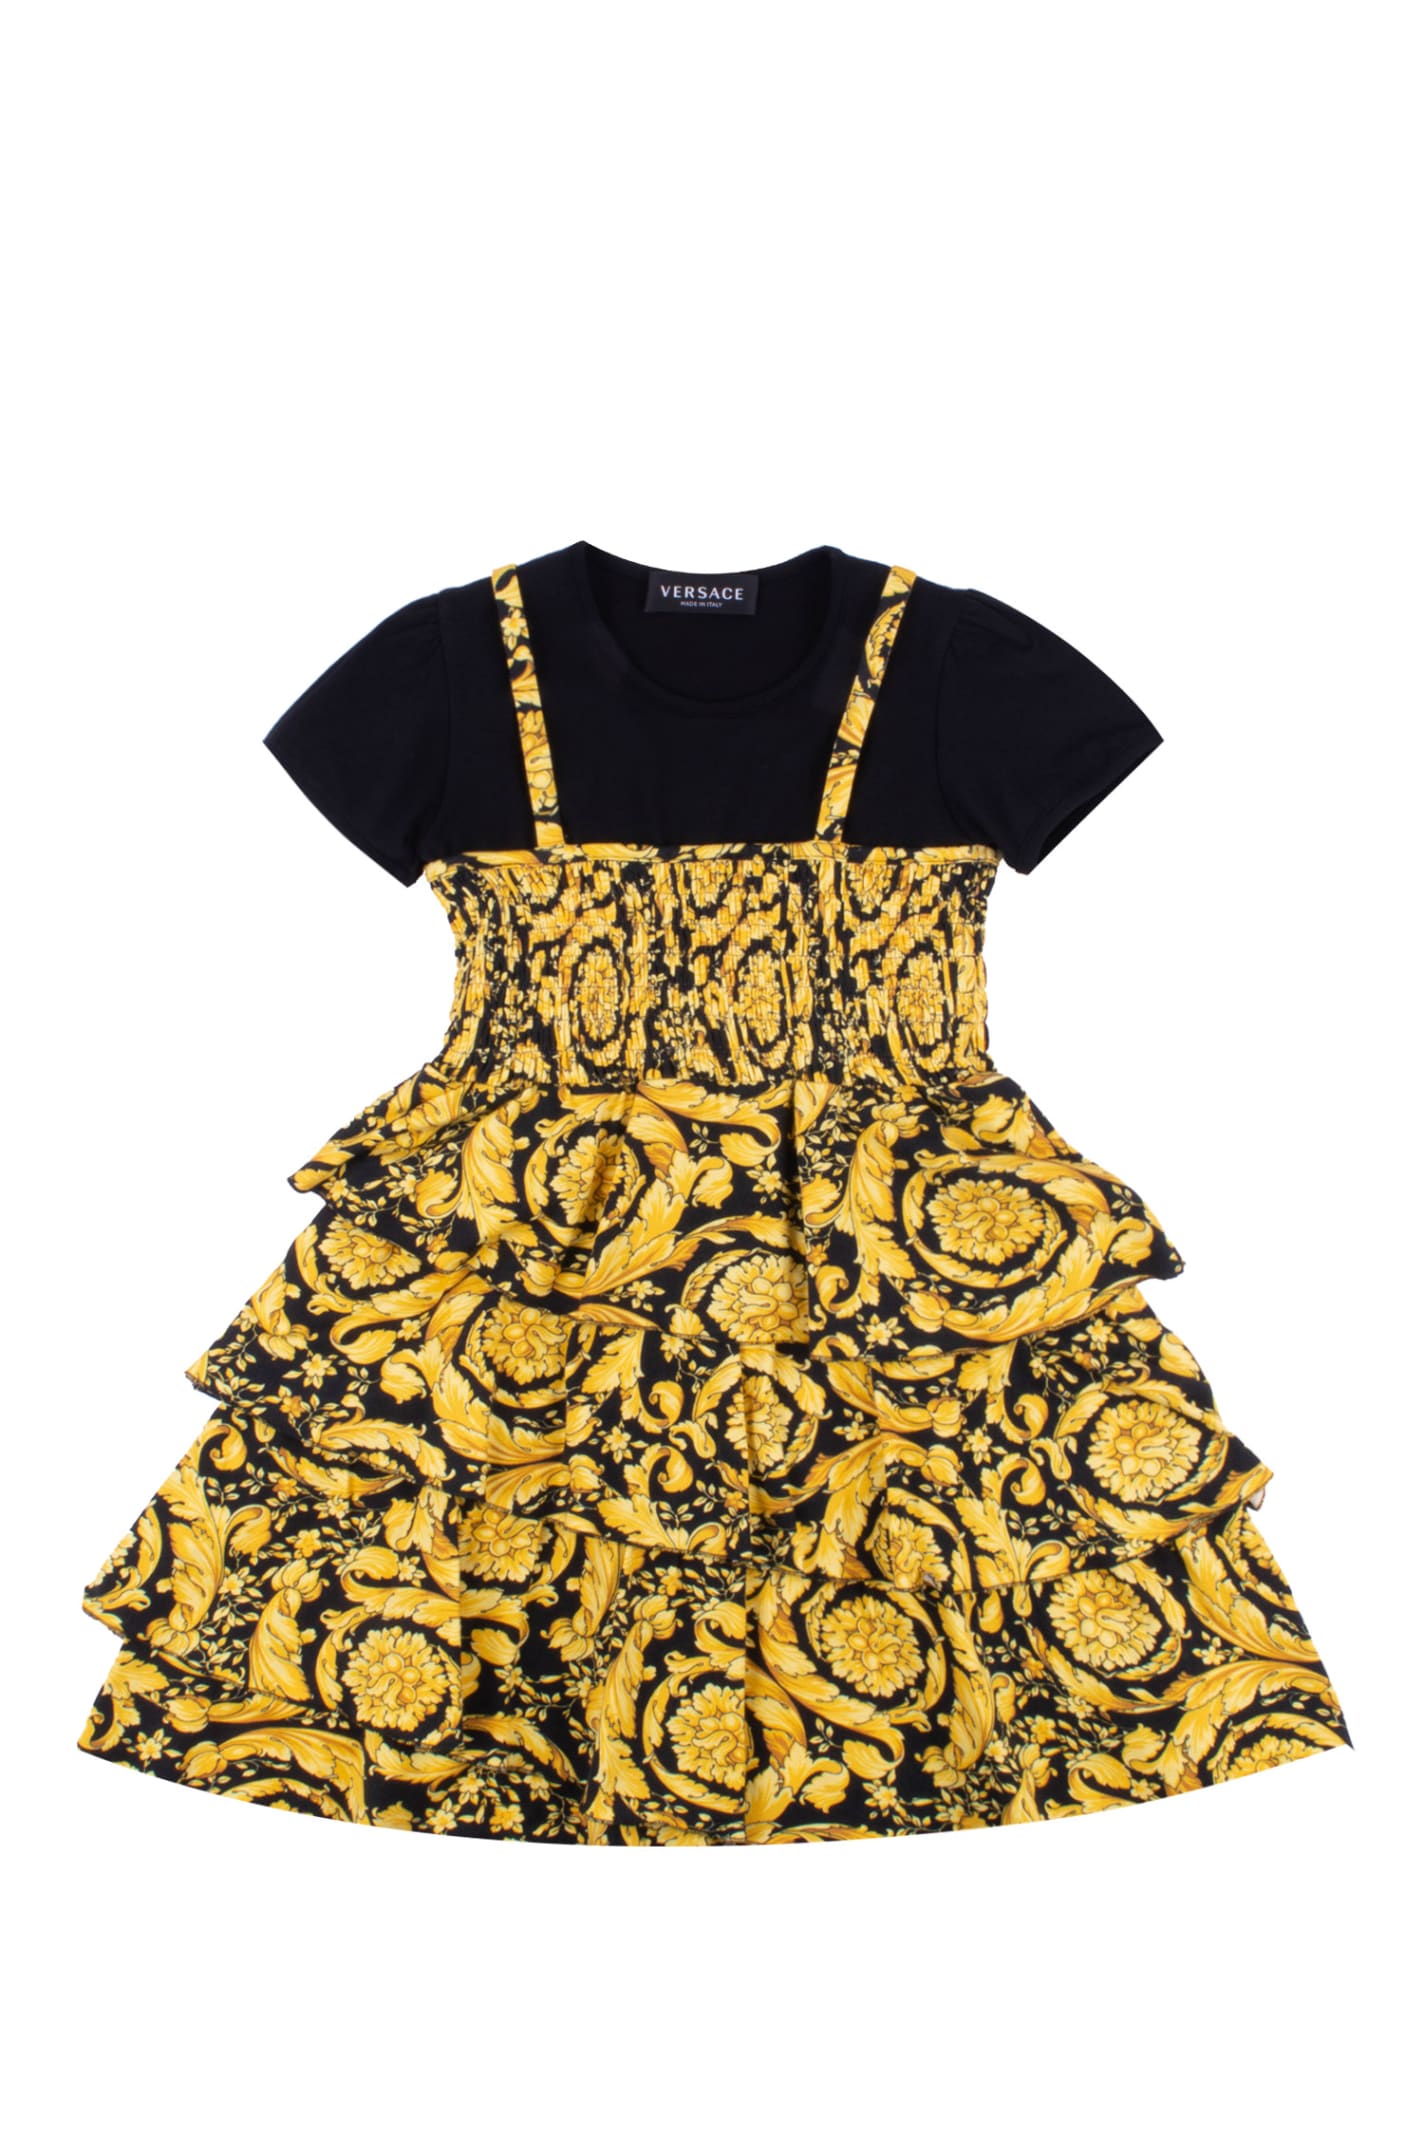 Versace Kids' Dress With Baroque Flounce In Multicolor